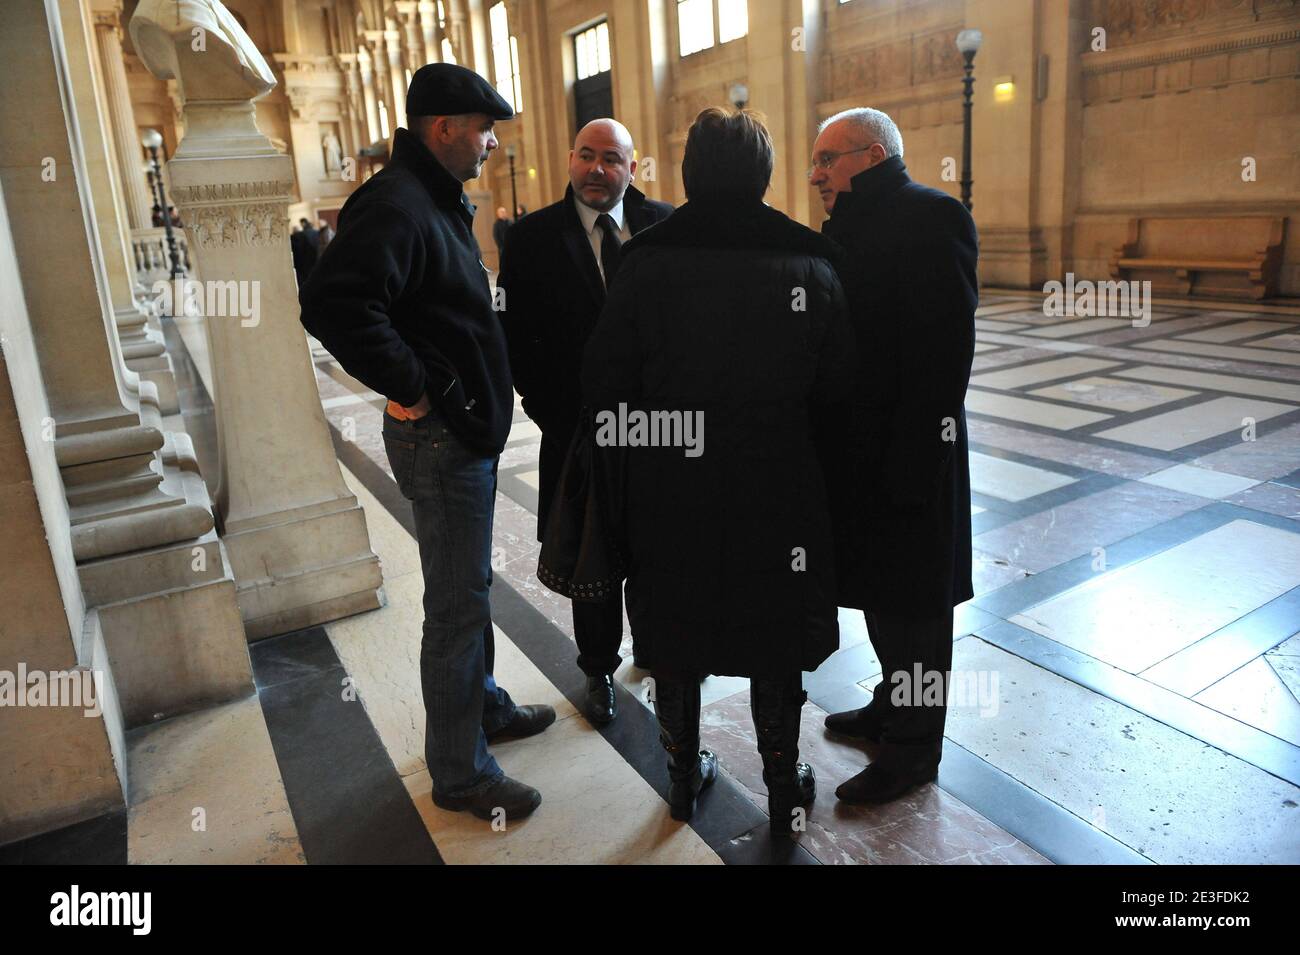 Stephane Colonna, Yvan Colonna's brother and Christine Colonna, Yvan Colonna's sister speak with Yvan Colonna's laywers Pascal Garbarini and Antoine Sollacaro at the Paris courthouse to attend the Yvan Colonna Trial, in Paris, France, on March 6, 2009. Photo by Mousse/ABACAPRESS.COM Stock Photo